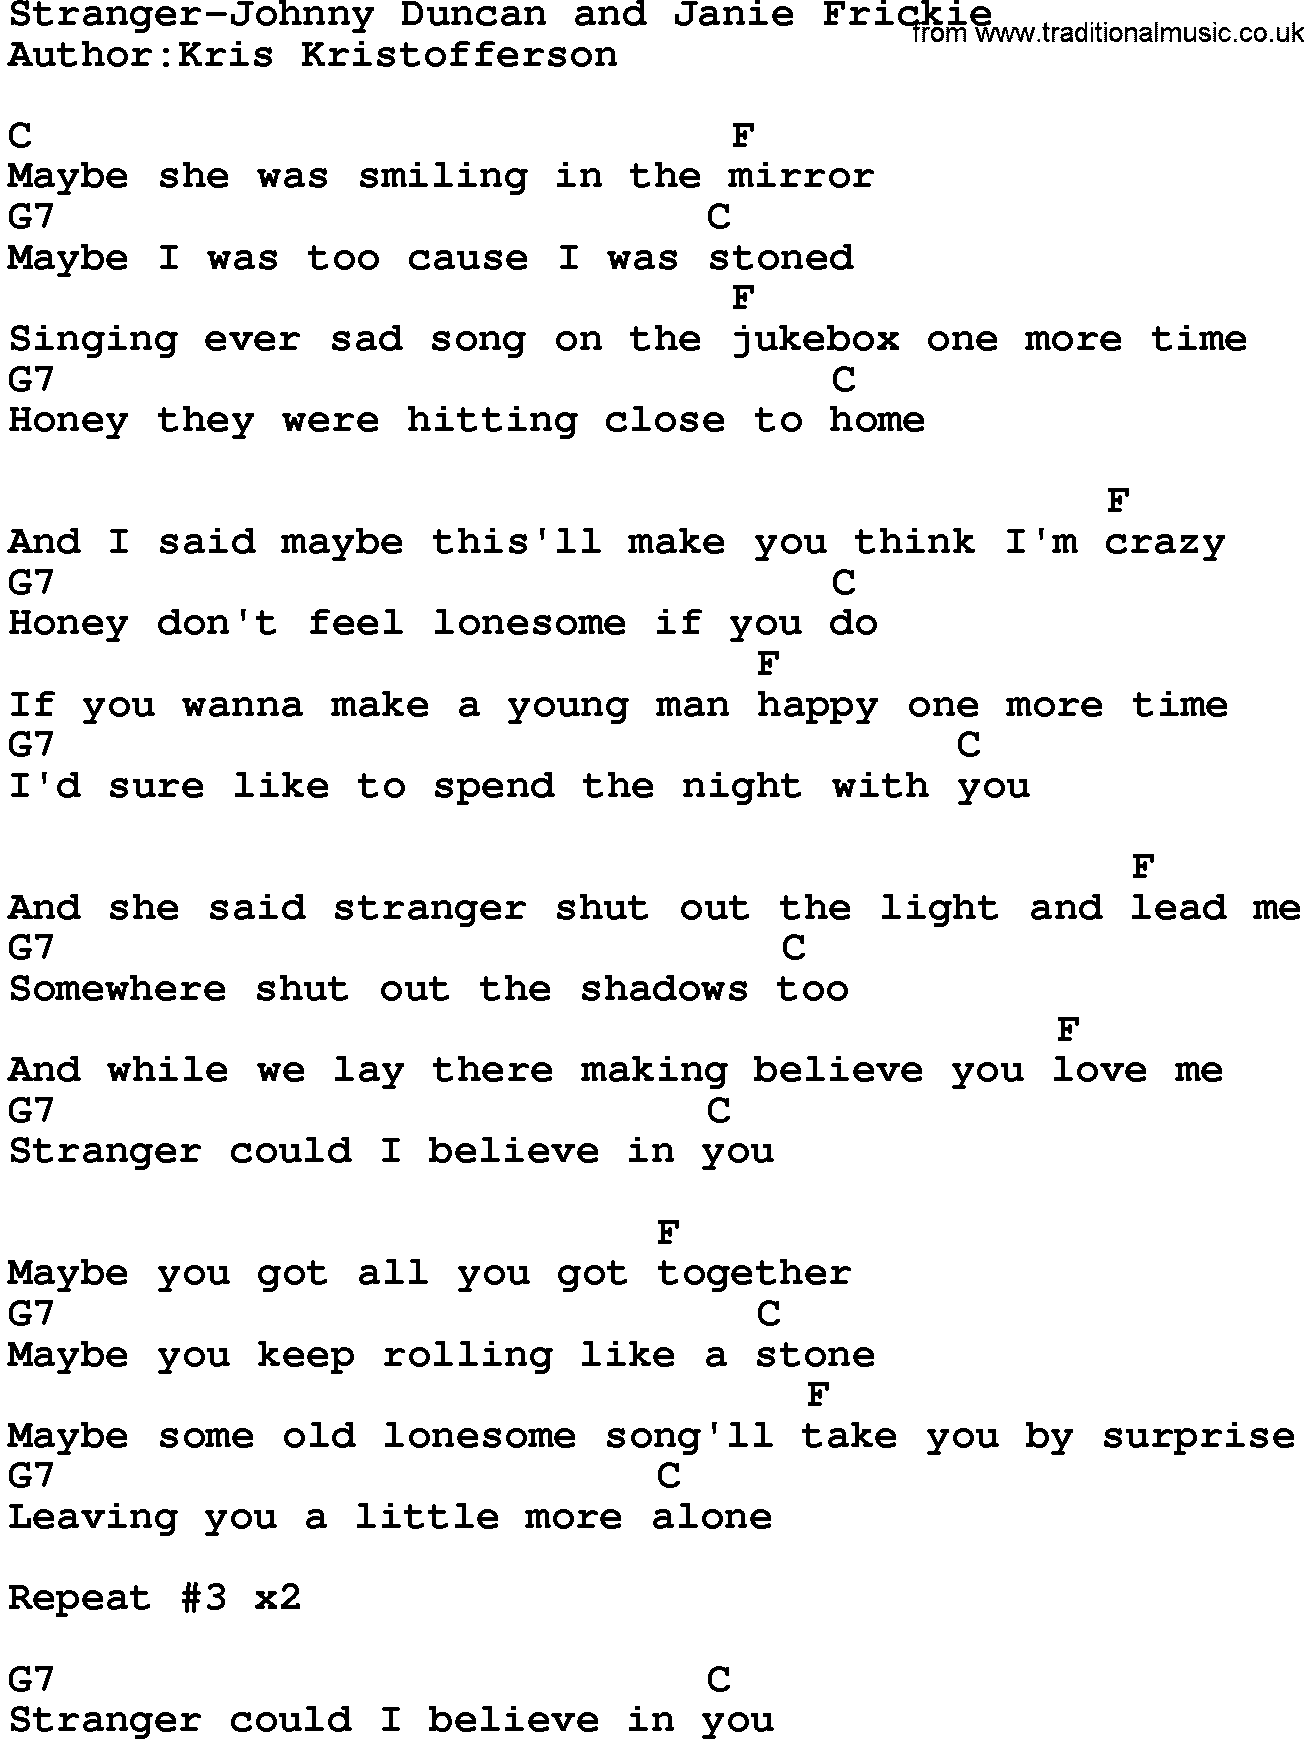 Country music song: Stranger-Johnny Duncan And Janie Frickie lyrics and chords